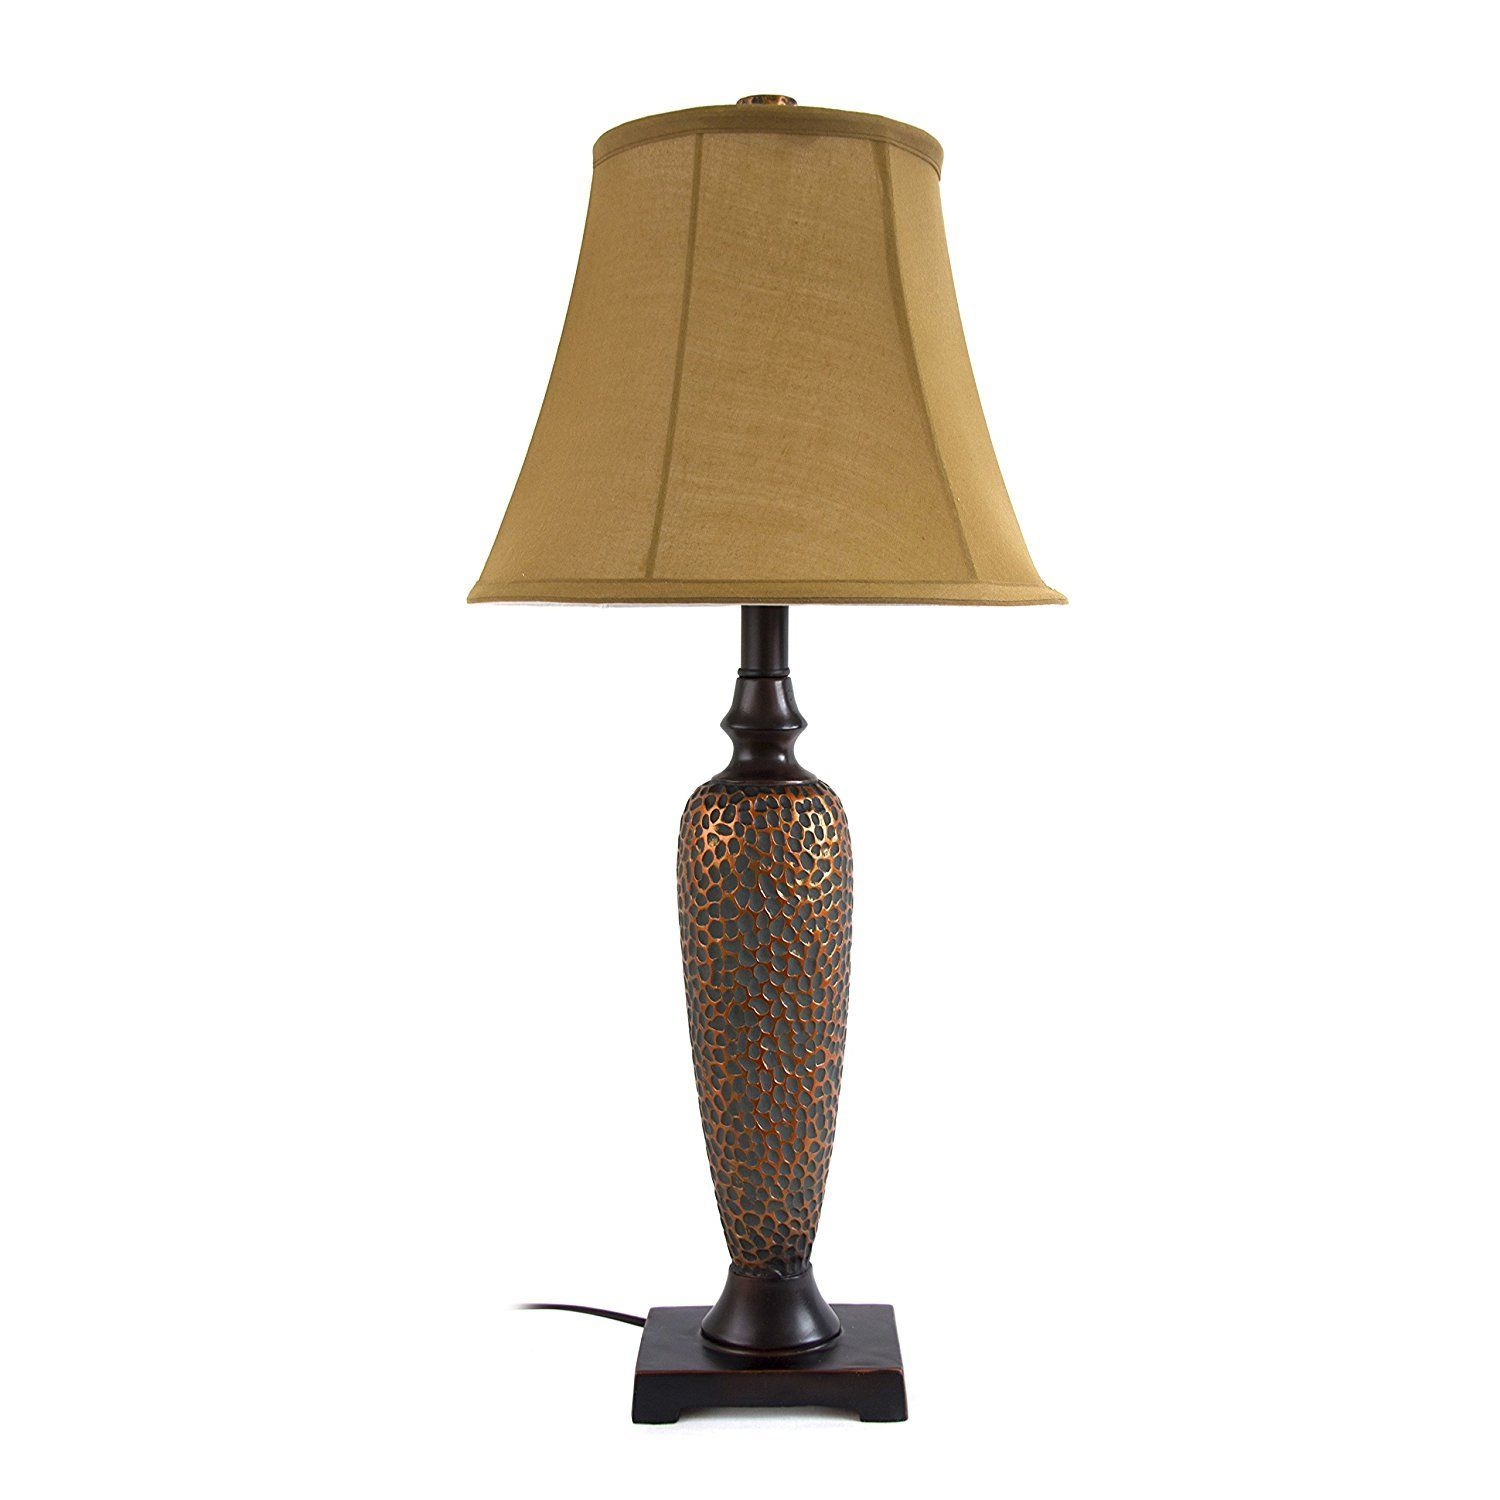 Elegant Hammered Bronze Finish Table Floor Lamp Set 3 throughout proportions 1500 X 1500